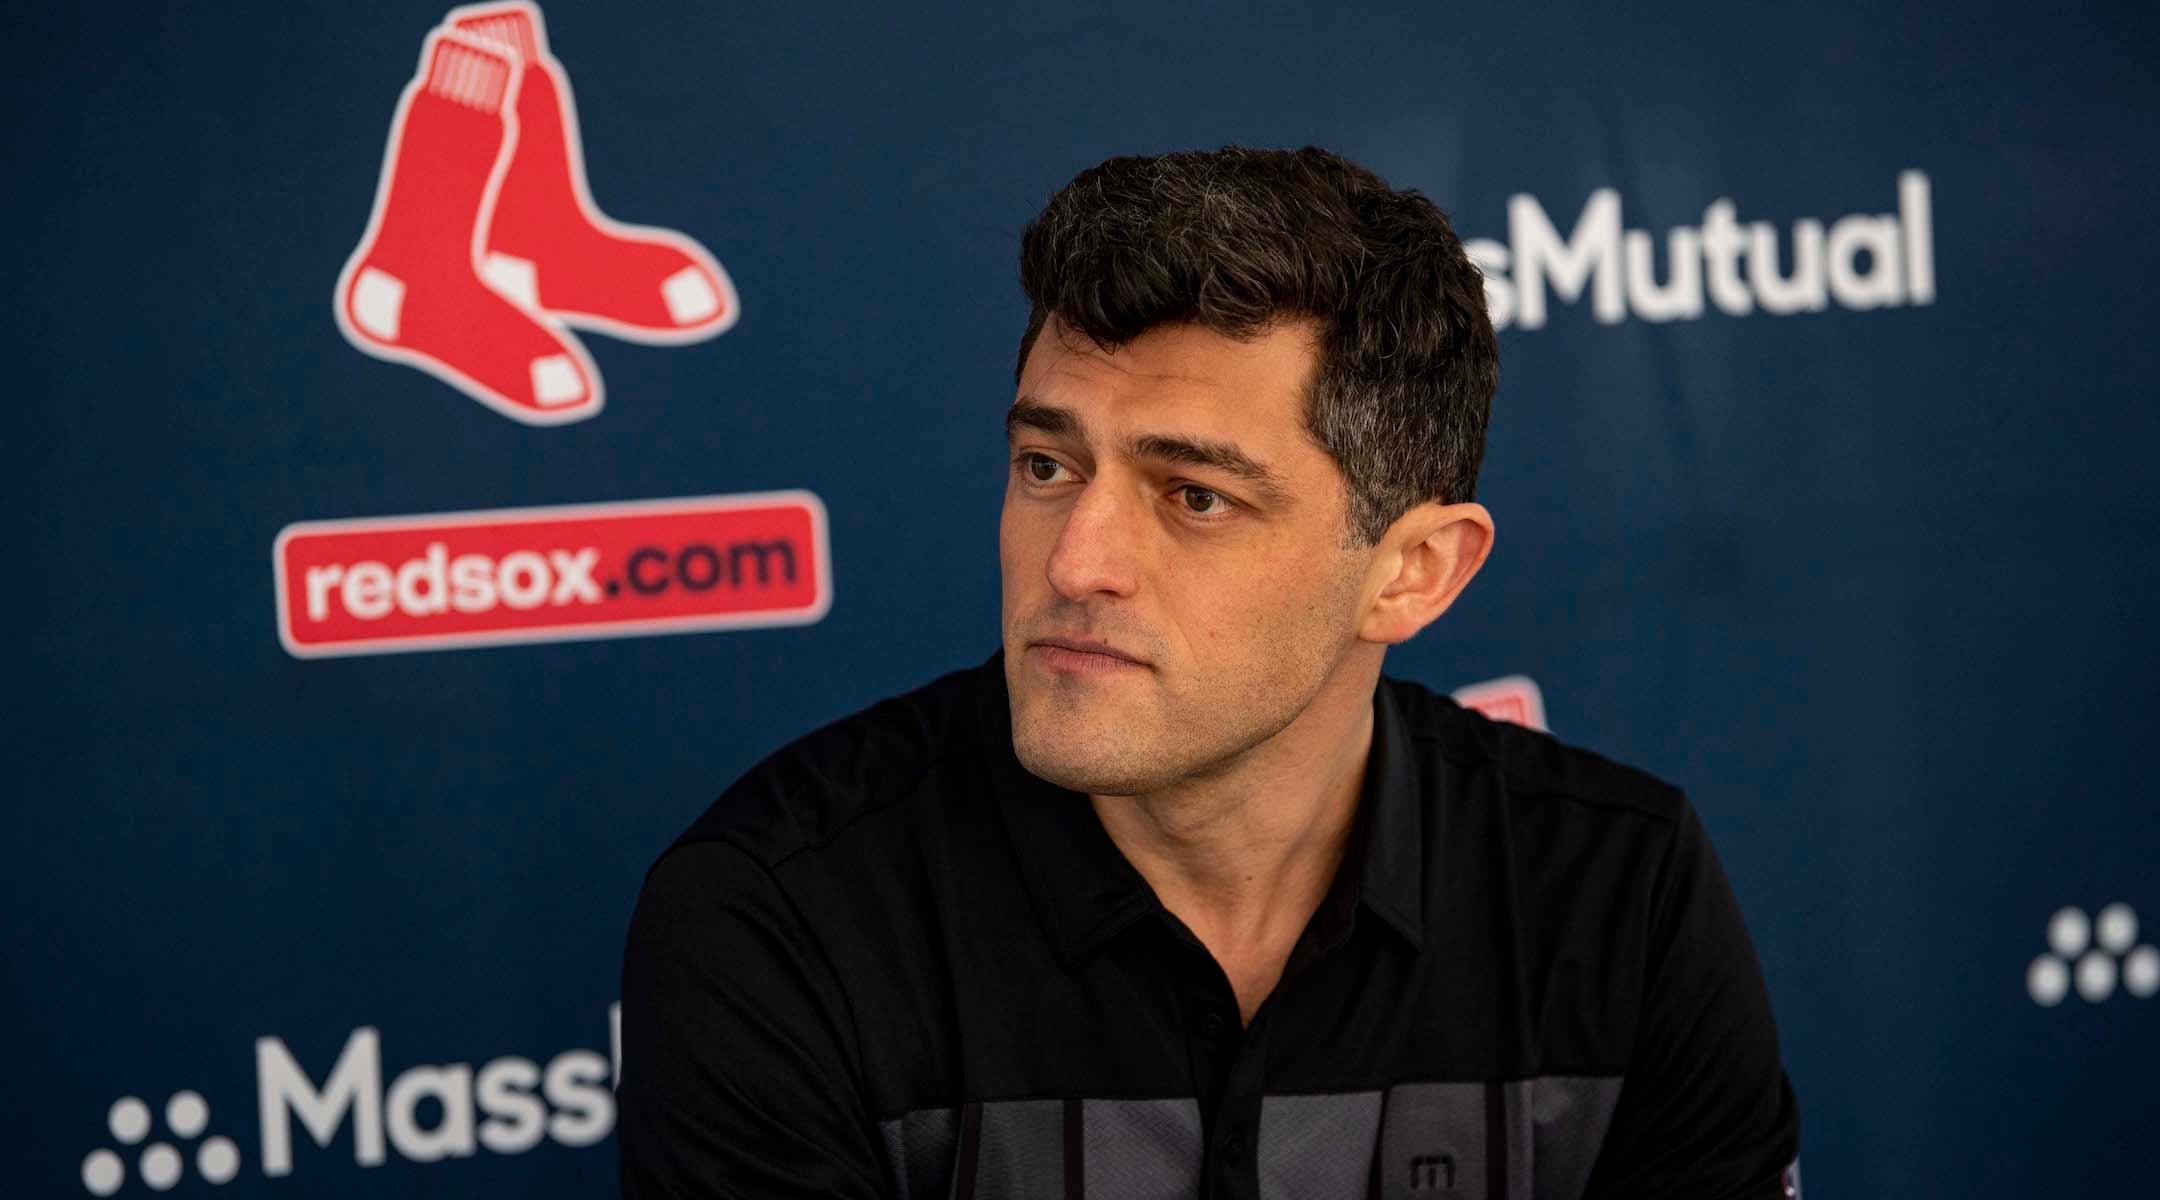 Boston Red Sox Chief Baseball Officer Chaim Bloom speaks during a press conference at a spring training team workout in Fort Myers, Fla., Feb.13, 2023. (Billie Weiss/Boston Red Sox/Getty Images)